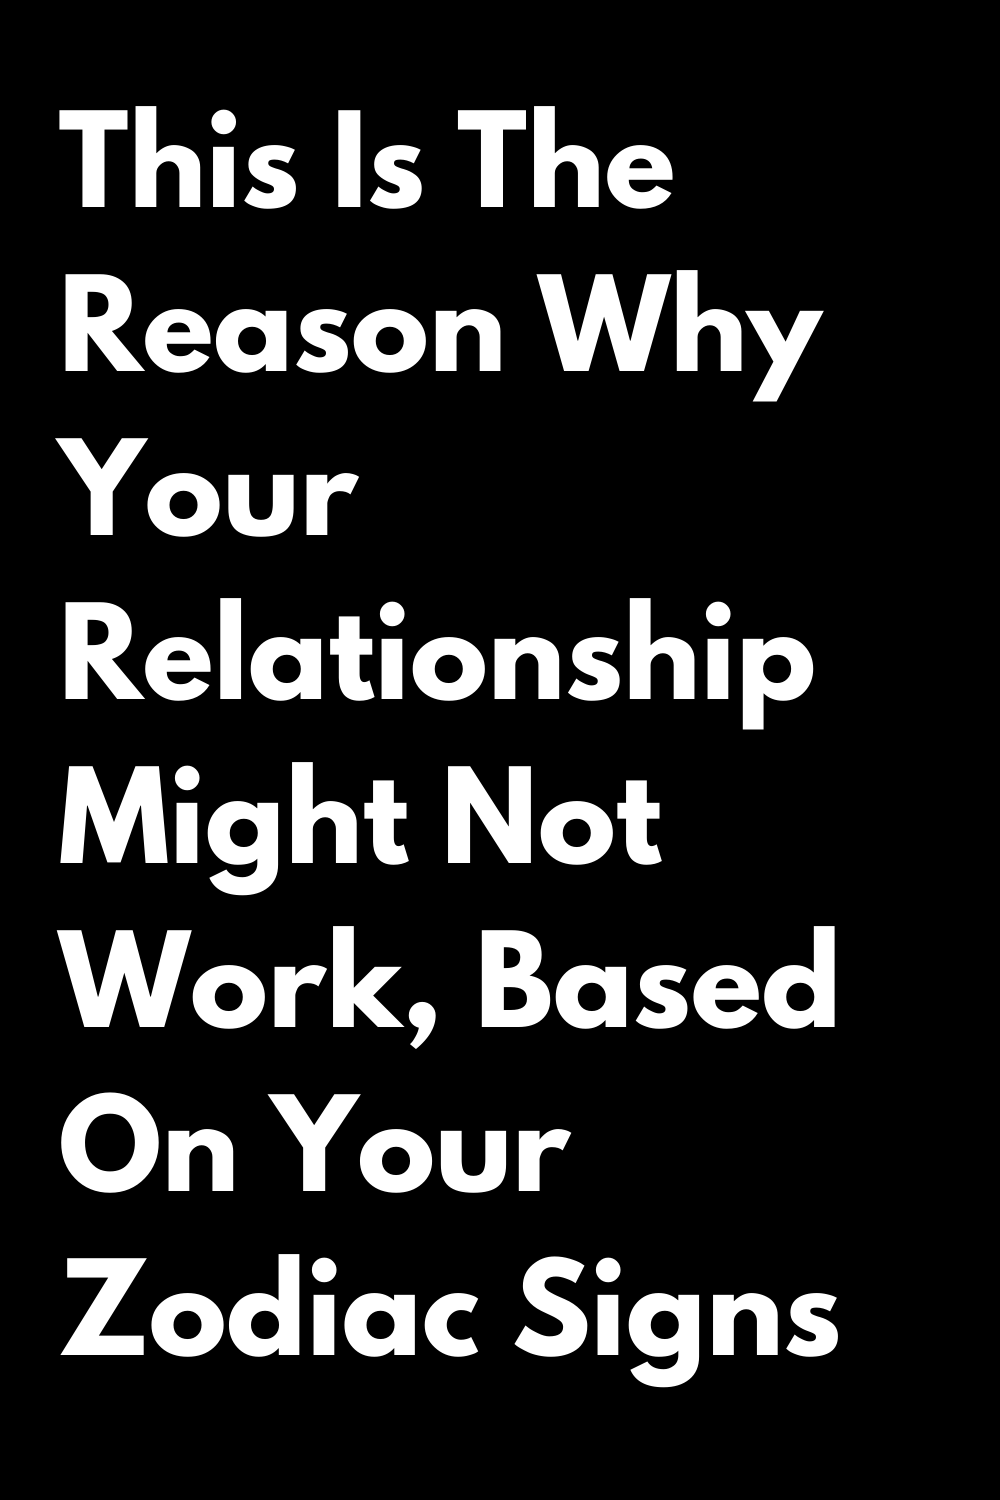 This Is The Reason Why Your Relationship Might Not Work, Based On Your Zodiac Signs